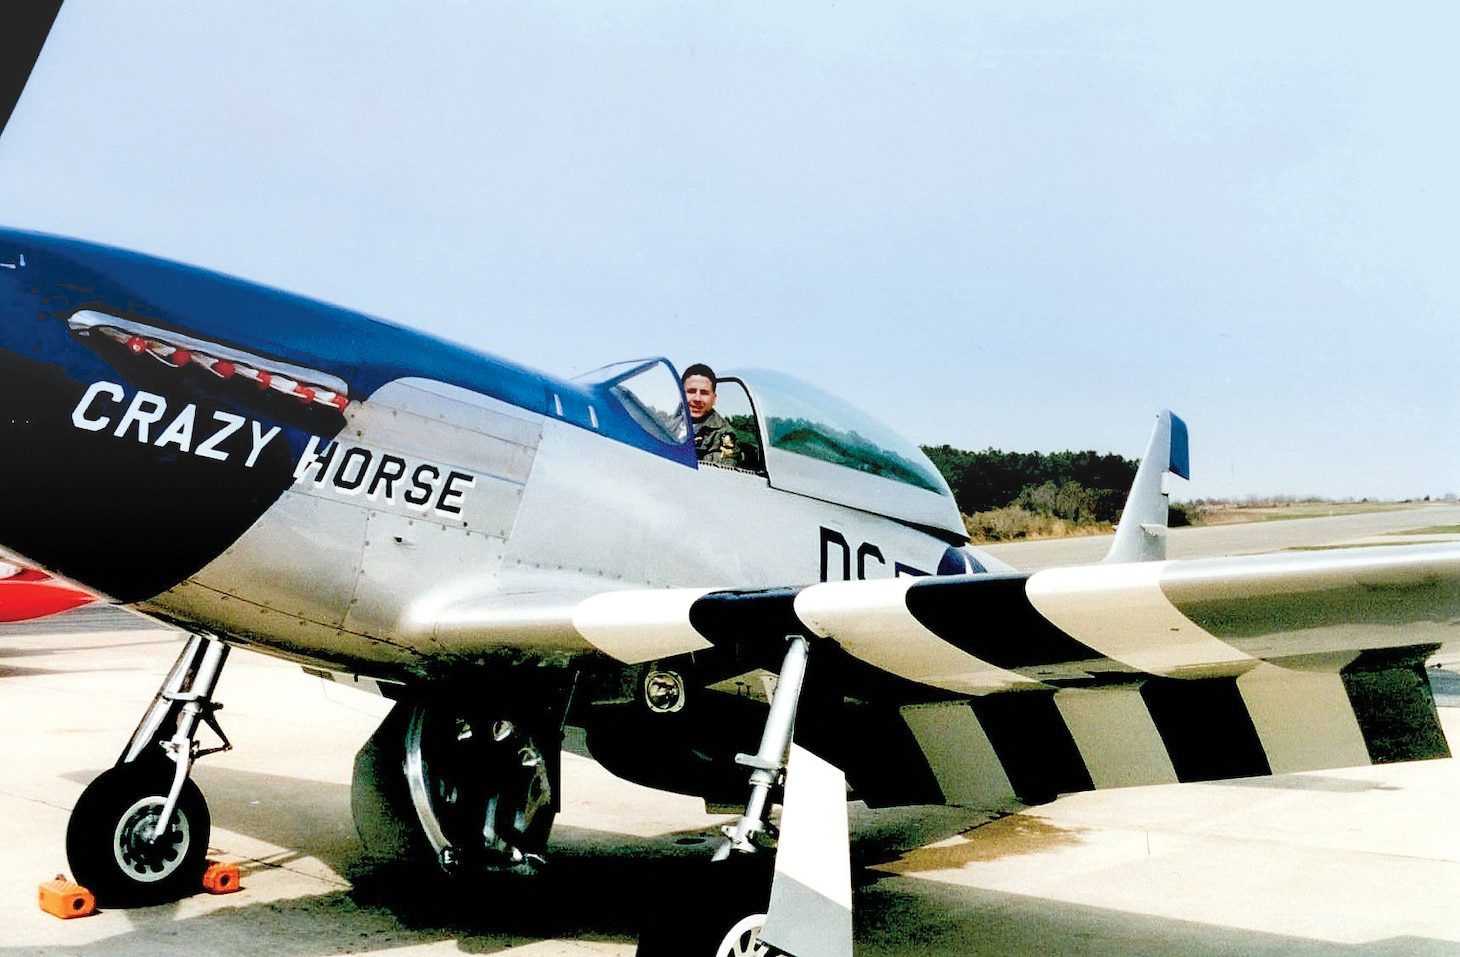 Chebi poses for a photo in the cockpit of a P-51 Mustang circa 1995 at the United States Naval Test Pilot School at Naval Air Station Patuxent River, Md.